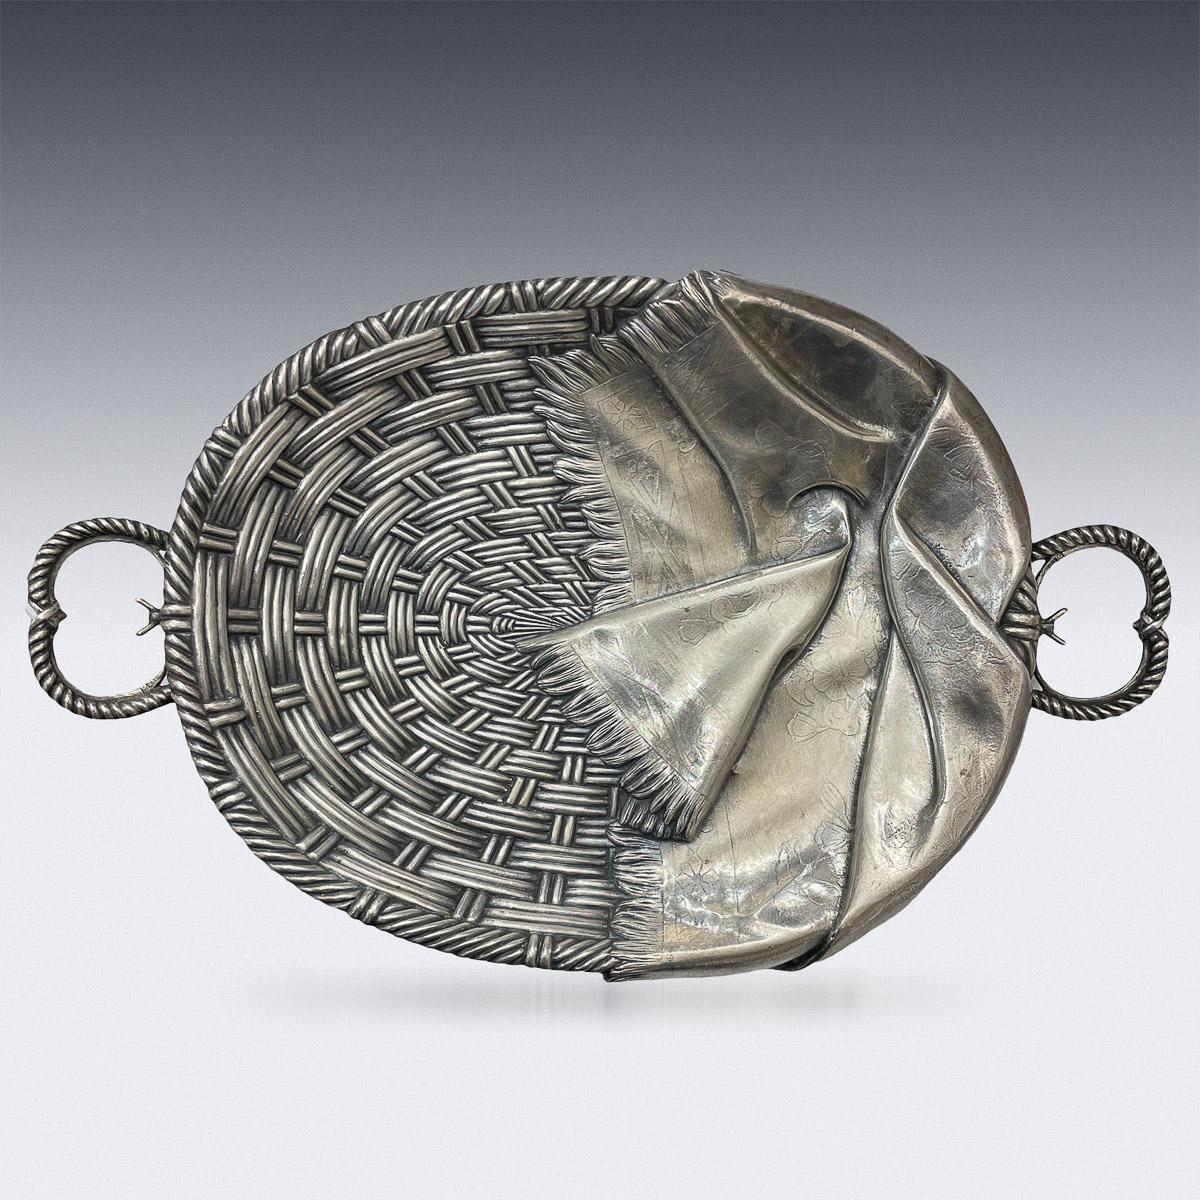 Russian sliver trompe l’oeil basket, Moscow 1878 , marked 84 for Russian silver with GL in Cyrillic for Grigoriy Laskutov, retail mark of Khlebnikov.

CONDITION
In Great Condition - Please refer to photographs.

SIZE
Height: 5.5cm
Width: 38cm
Depth: